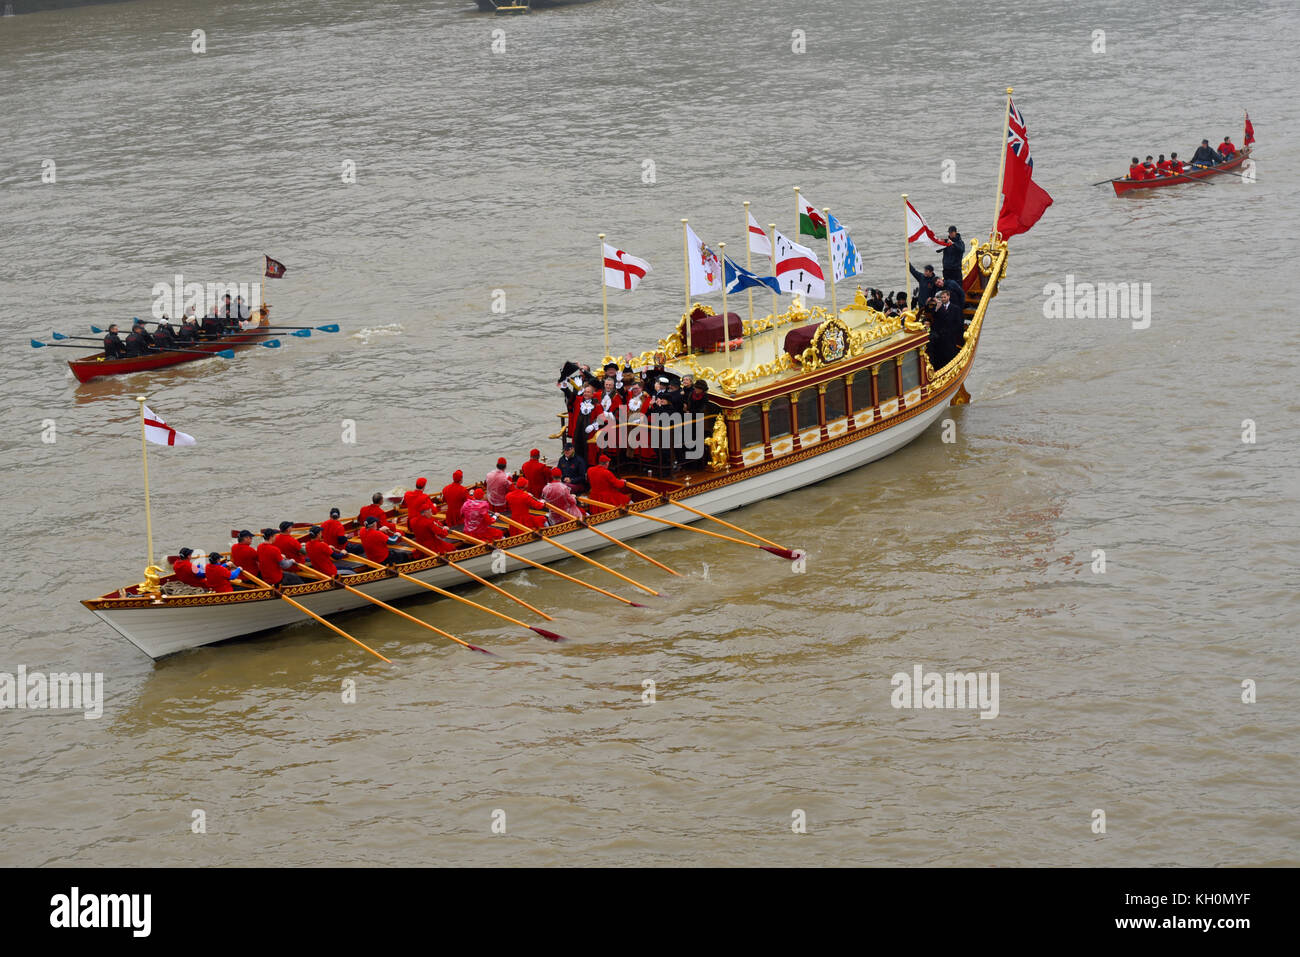 London’s new Lord Mayor Charles Bowman travelled aboard the Queen’s Rowbarge Gloriana accompanied by a flotilla of traditional Thames boats on River Thames London Stock Photo